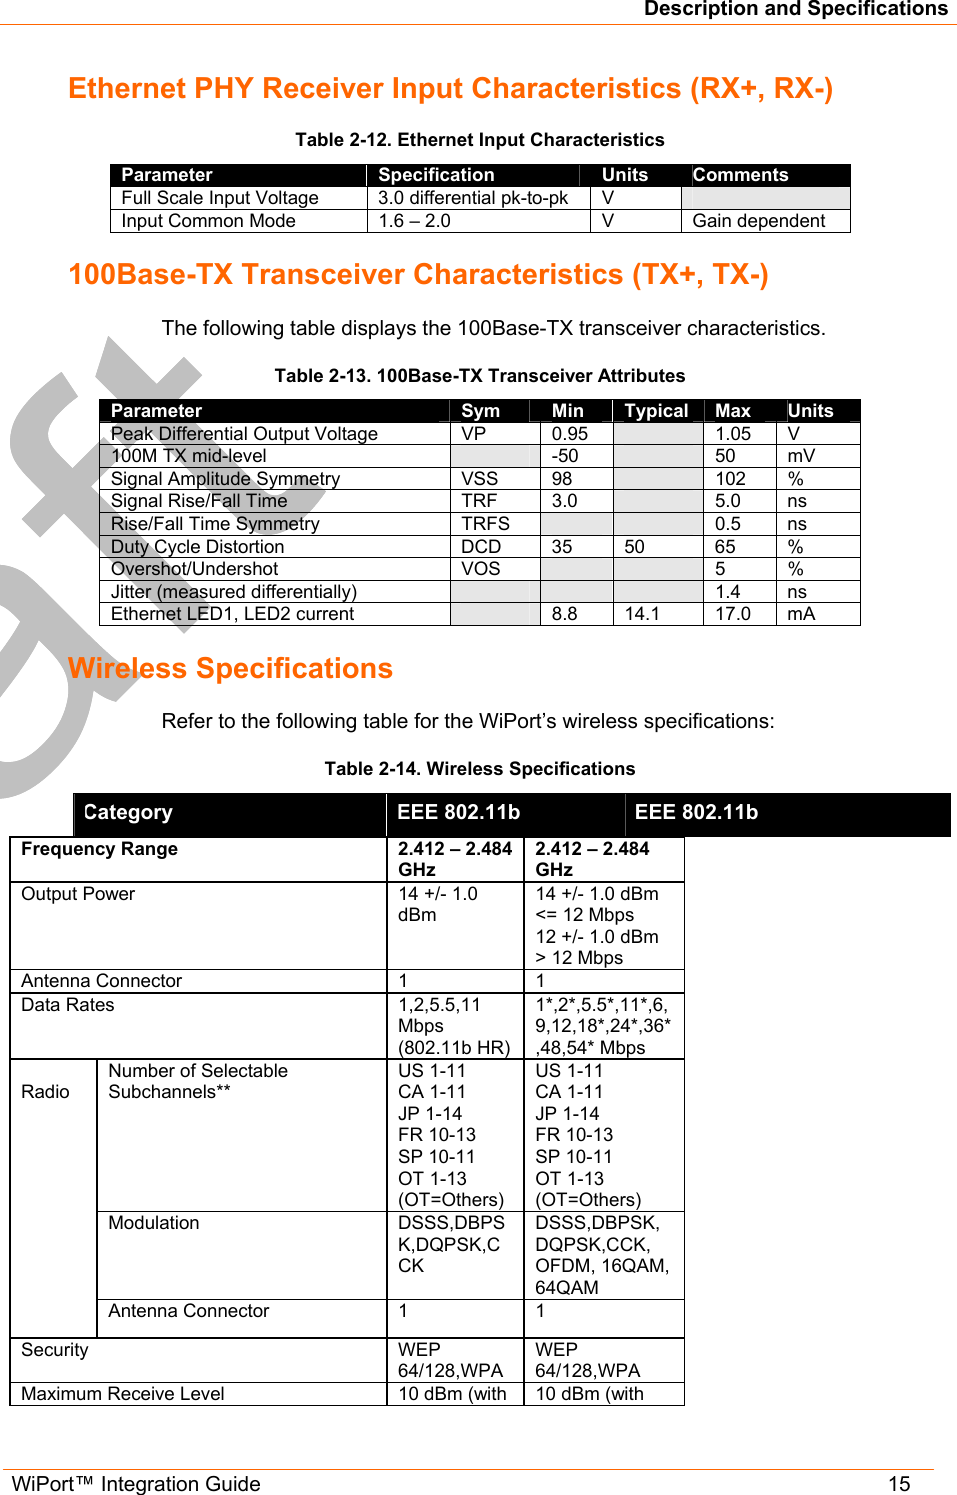 Description and Specifications WiPort™ Integration Guide   15 Ethernet PHY Receiver Input Characteristics (RX+, RX-) Table 2-12. Ethernet Input Characteristics Parameter  Specification  Units  Comments Full Scale Input Voltage  3.0 differential pk-to-pk  V   Input Common Mode  1.6 – 2.0  V  Gain dependent 100Base-TX Transceiver Characteristics (TX+, TX-) The following table displays the 100Base-TX transceiver characteristics. Table 2-13. 100Base-TX Transceiver Attributes Parameter  Sym  Min  Typical  Max  Units Peak Differential Output Voltage  VP  0.95   1.05 V 100M TX mid-level   -50   50 mV Signal Amplitude Symmetry  VSS  98   102 % Signal Rise/Fall Time  TRF  3.0   5.0 ns Rise/Fall Time Symmetry  TRFS      0.5 ns Duty Cycle Distortion  DCD  35  50  65  % Overshot/Undershot VOS     5 % Jitter (measured differentially)     1.4 ns Ethernet LED1, LED2 current   8.8 14.1  17.0 mA Wireless Specifications Refer to the following table for the WiPort’s wireless specifications: Table 2-14. Wireless Specifications Category  IEEE 802.11b  IEEE 802.11b Frequency Range   2.412 – 2.484 GHz  2.412 – 2.484 GHz  Output Power   14 +/- 1.0 dBm  14 +/- 1.0 dBm  &lt;= 12 Mbps 12 +/- 1.0 dBm  &gt; 12 Mbps Antenna Connector   1  1 Data Rates  1,2,5.5,11 Mbps (802.11b HR) 1*,2*,5.5*,11*,6,9,12,18*,24*,36*,48,54* Mbps   Number of Selectable Subchannels** US 1-11 CA 1-11 JP 1-14 FR 10-13 SP 10-11 OT 1-13   (OT=Others) US 1-11 CA 1-11 JP 1-14 FR 10-13 SP 10-11 OT 1-13   (OT=Others) Modulation   DSSS,DBPSK,DQPSK,CCK  DSSS,DBPSK,DQPSK,CCK, OFDM, 16QAM, 64QAM   Radio  Antenna Connector  1   1  Security WEP 64/128,WPA WEP 64/128,WPA  Maximum Receive Level  10 dBm (with 10 dBm (with 